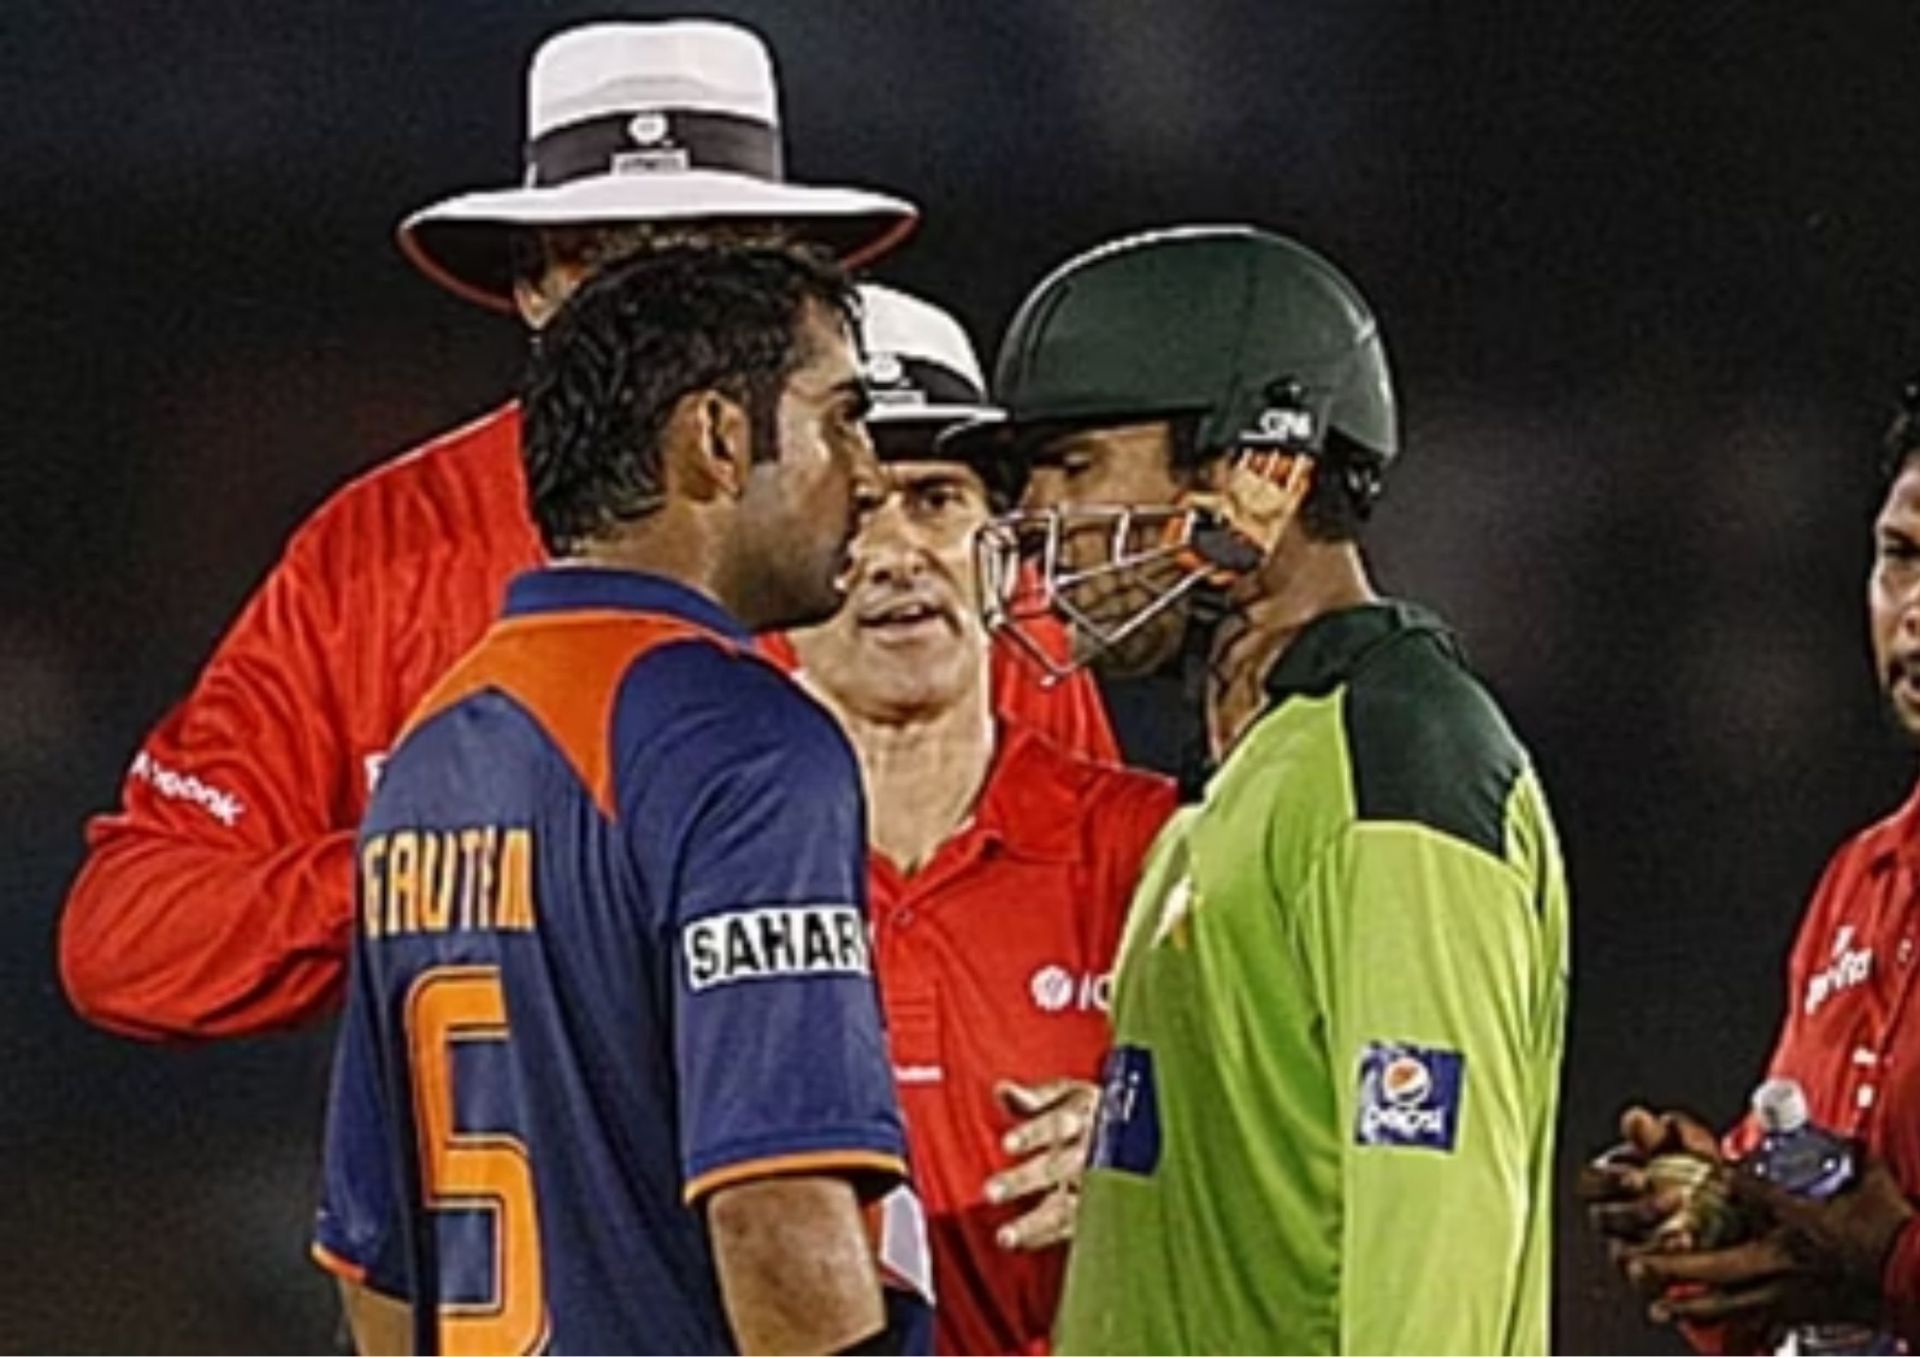 The India-Pakistan clash at the Asia Cup in 2010 was one for the ages (Picture Credits: AP via Hindustan Times).